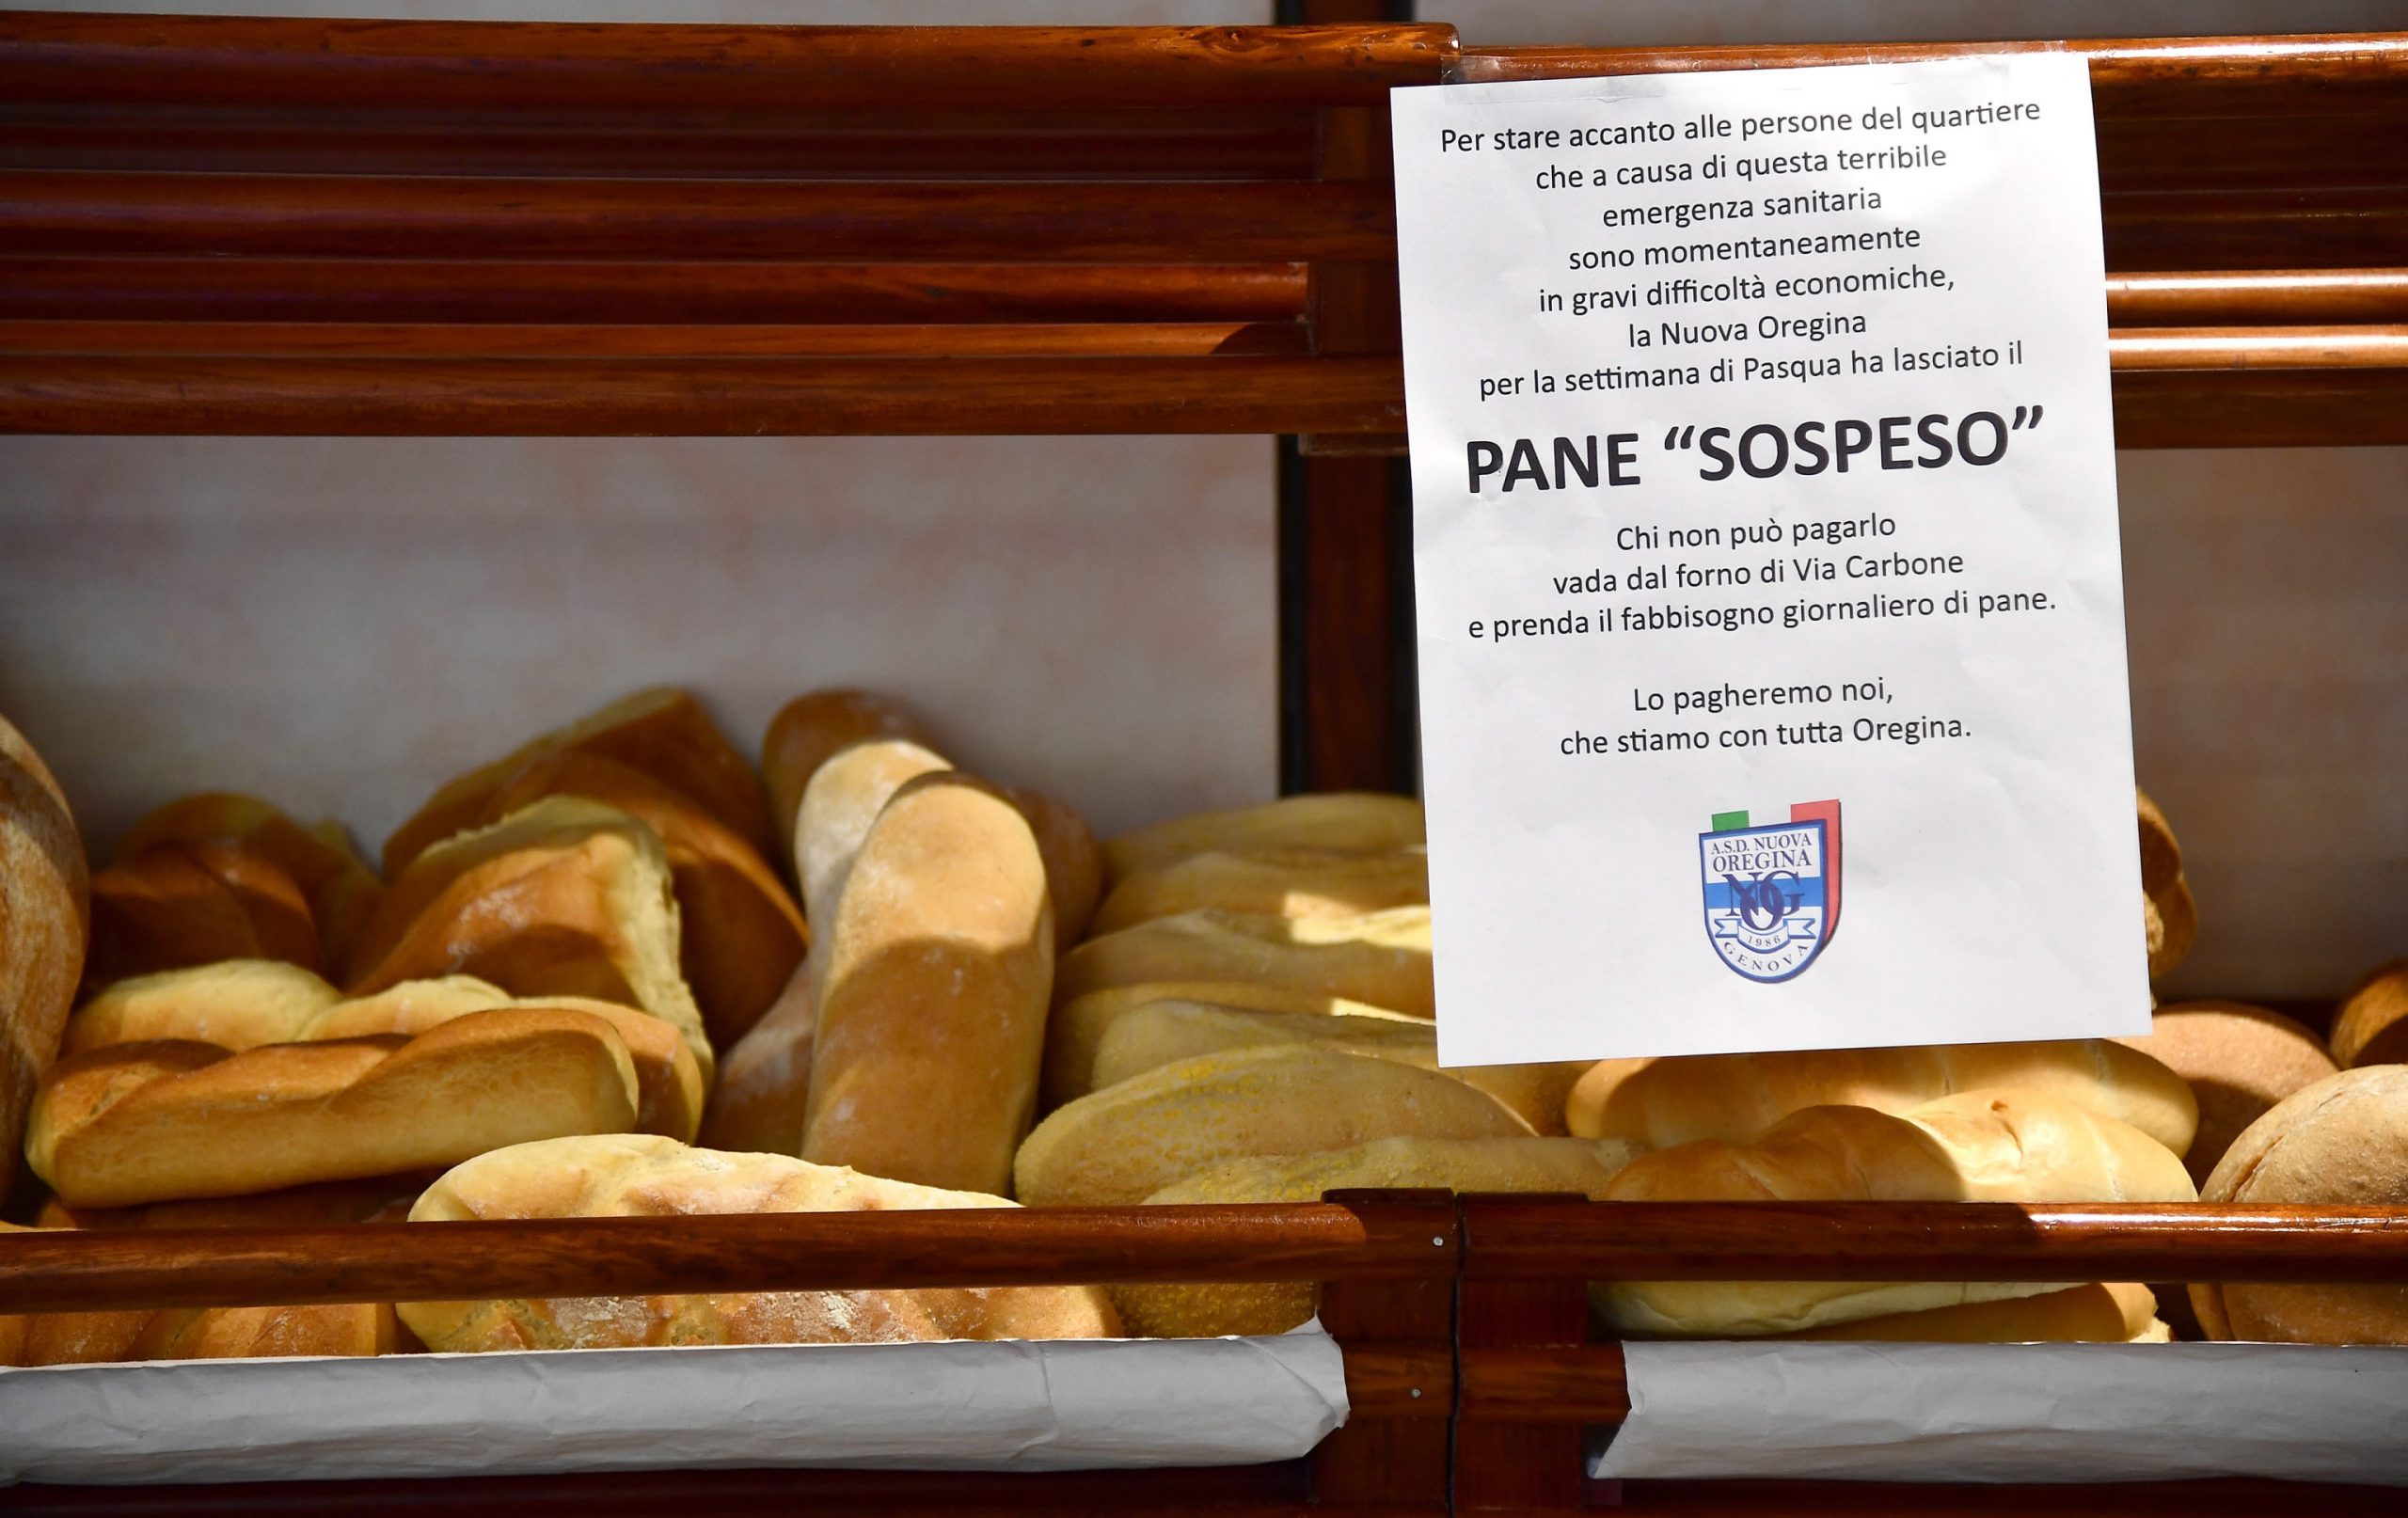 epa08339425 The 'suspended bread', an initiative to offer bread to people in need, realized by a sports club and a bakery store in Oregina district in Genoa, northern Italy, 02 April 2020. Italy is under lockdown in an attempt to stop the widespread of the SARS-CoV-2 coronavirus causing the Covid-19 disease.  EPA/LUCA ZENNARO